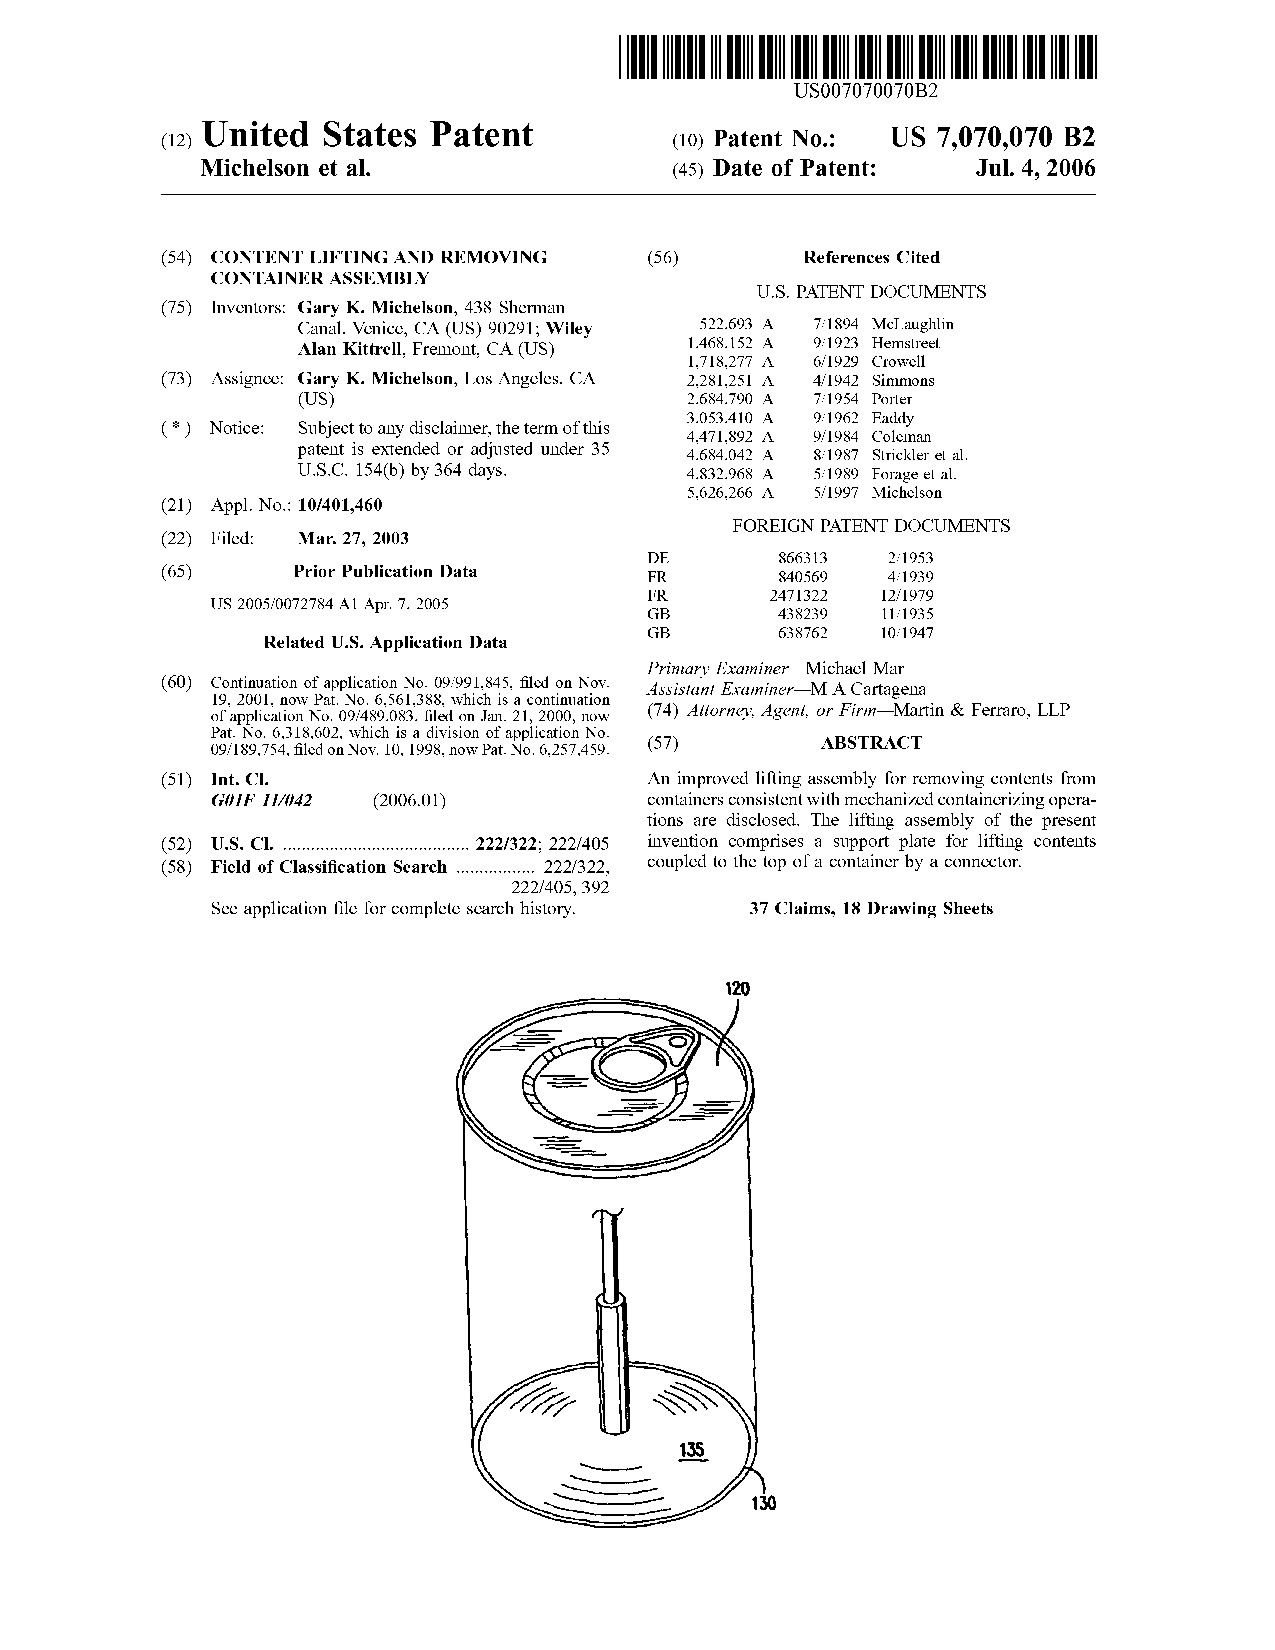 Content lifting and removing container assembly - Patent 7,070,070